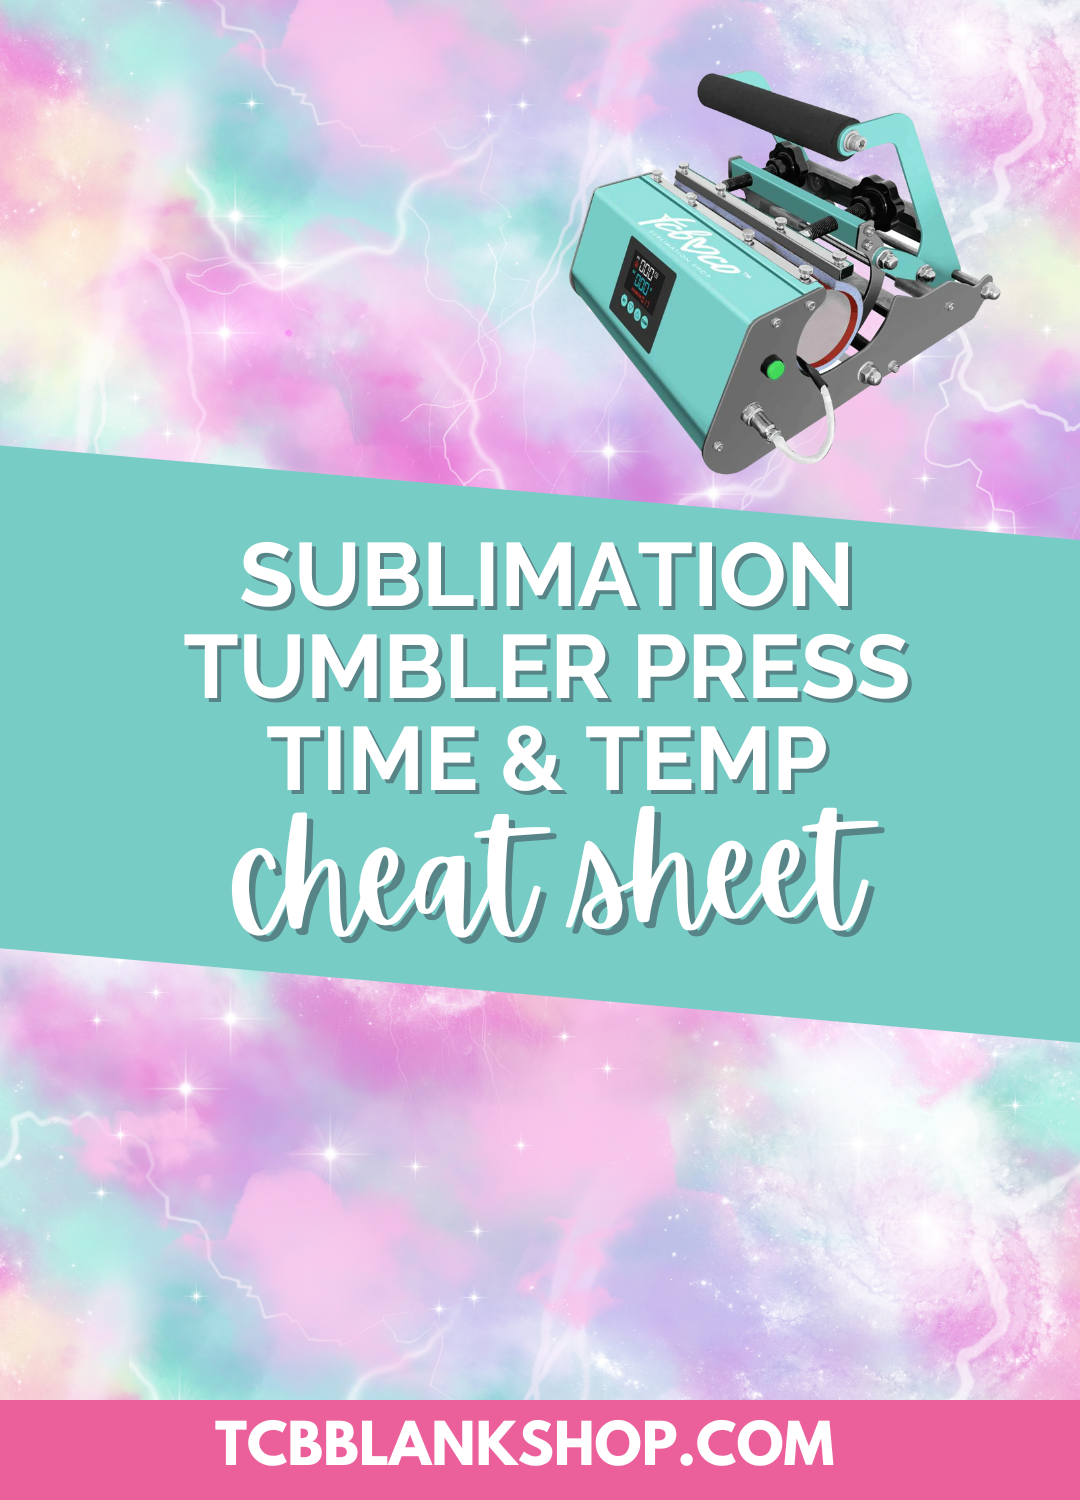 Sublimation Time & Temp Cheat Sheet